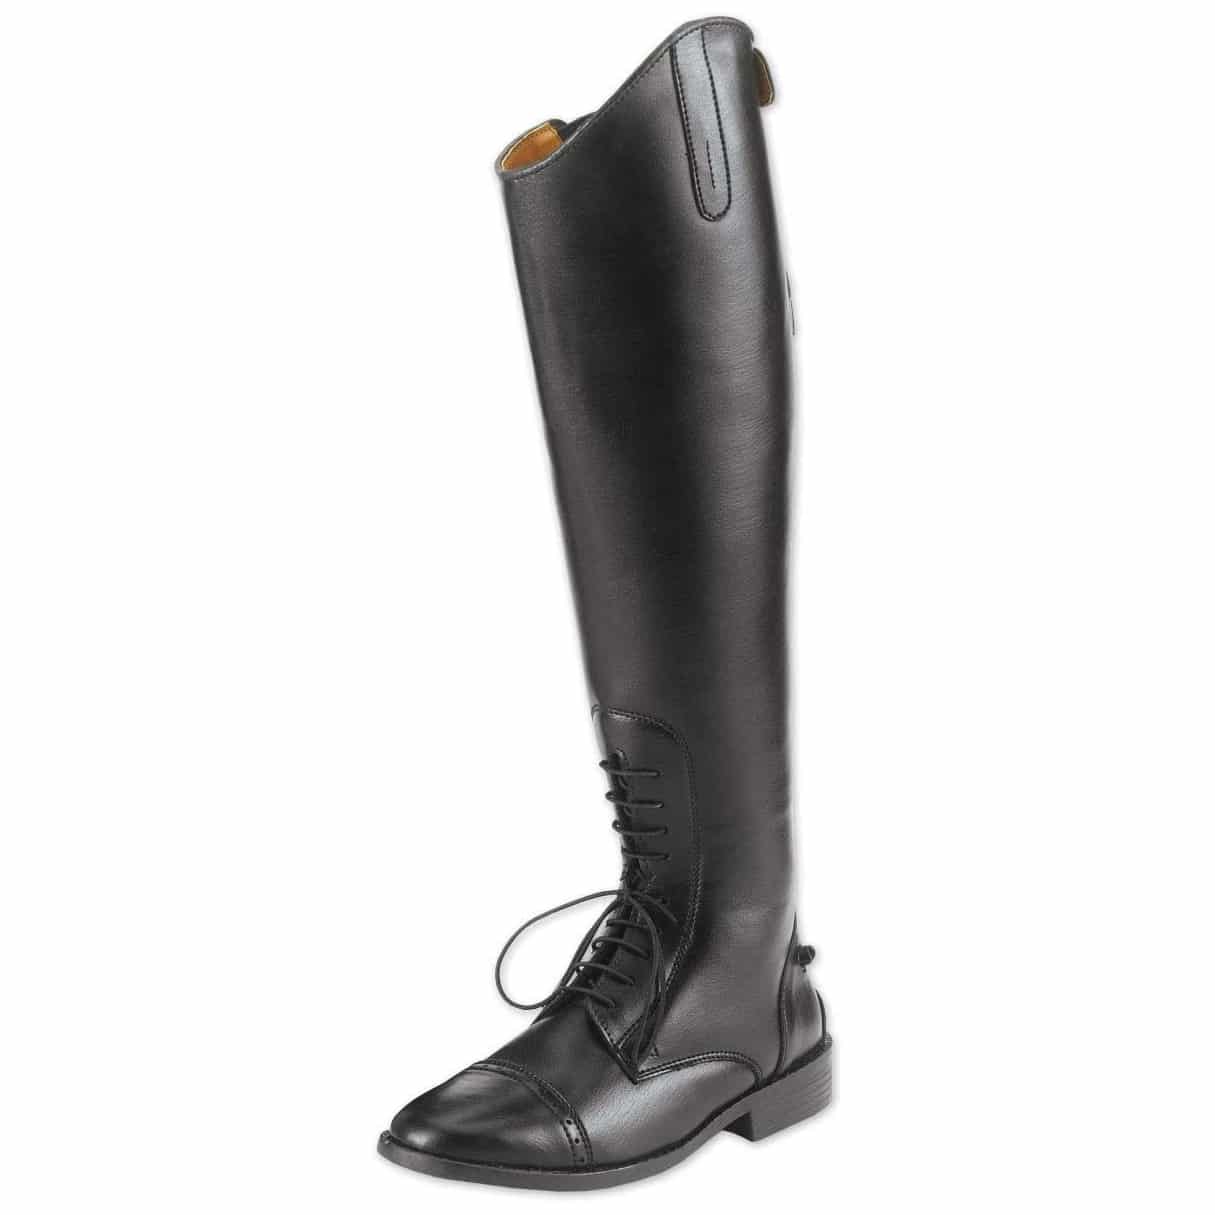 Equistar Childs All-Weather Synthetic Field Riding Boots